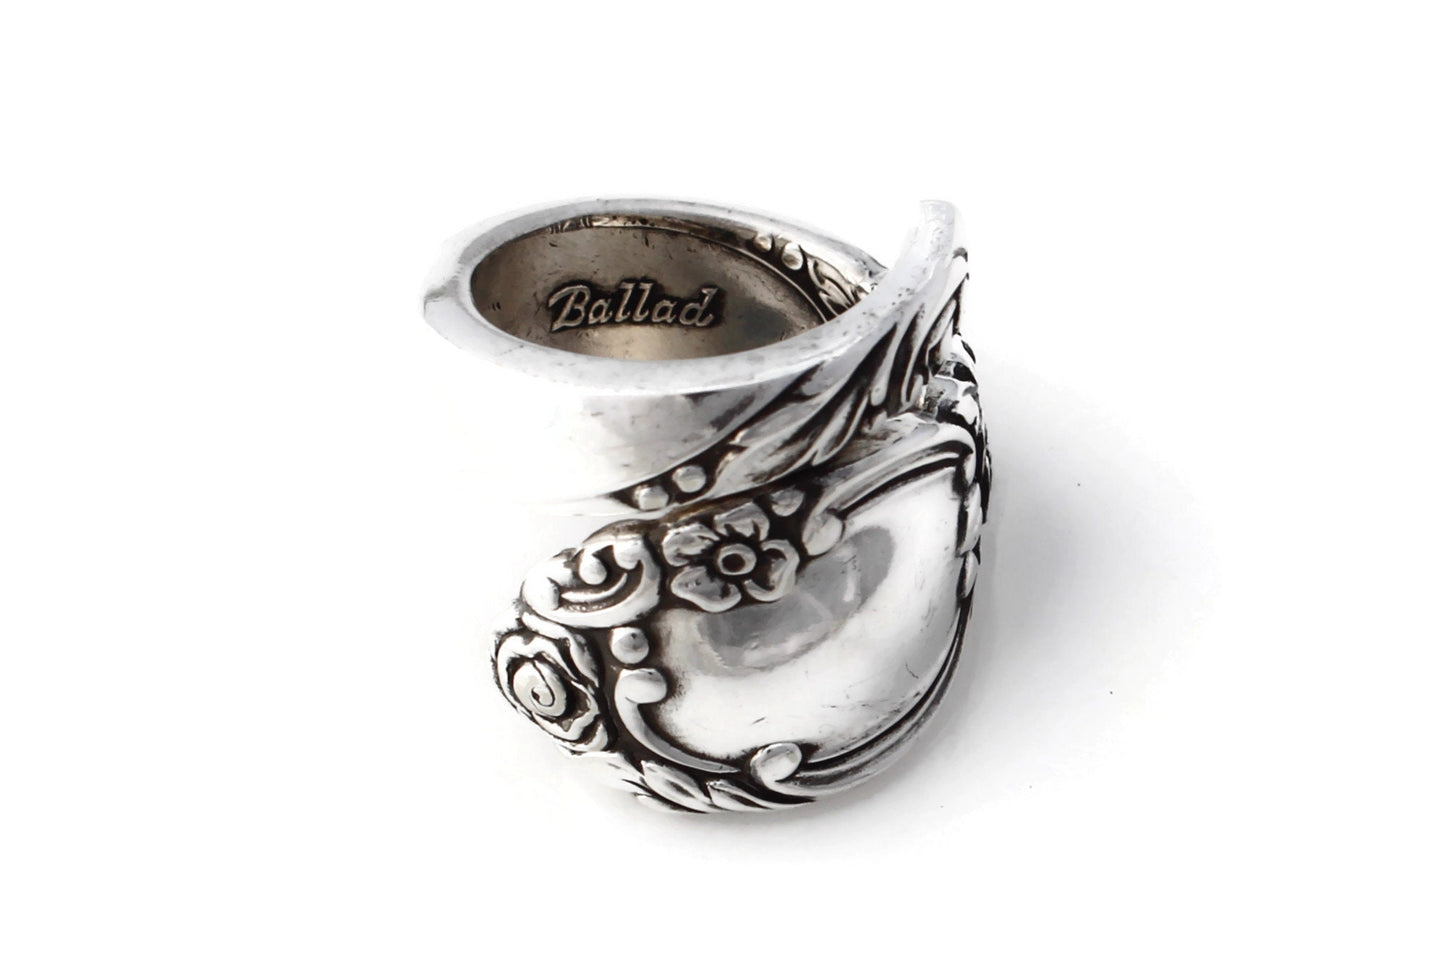 A Lovers Song Wrapped Ballad Spoon Ring